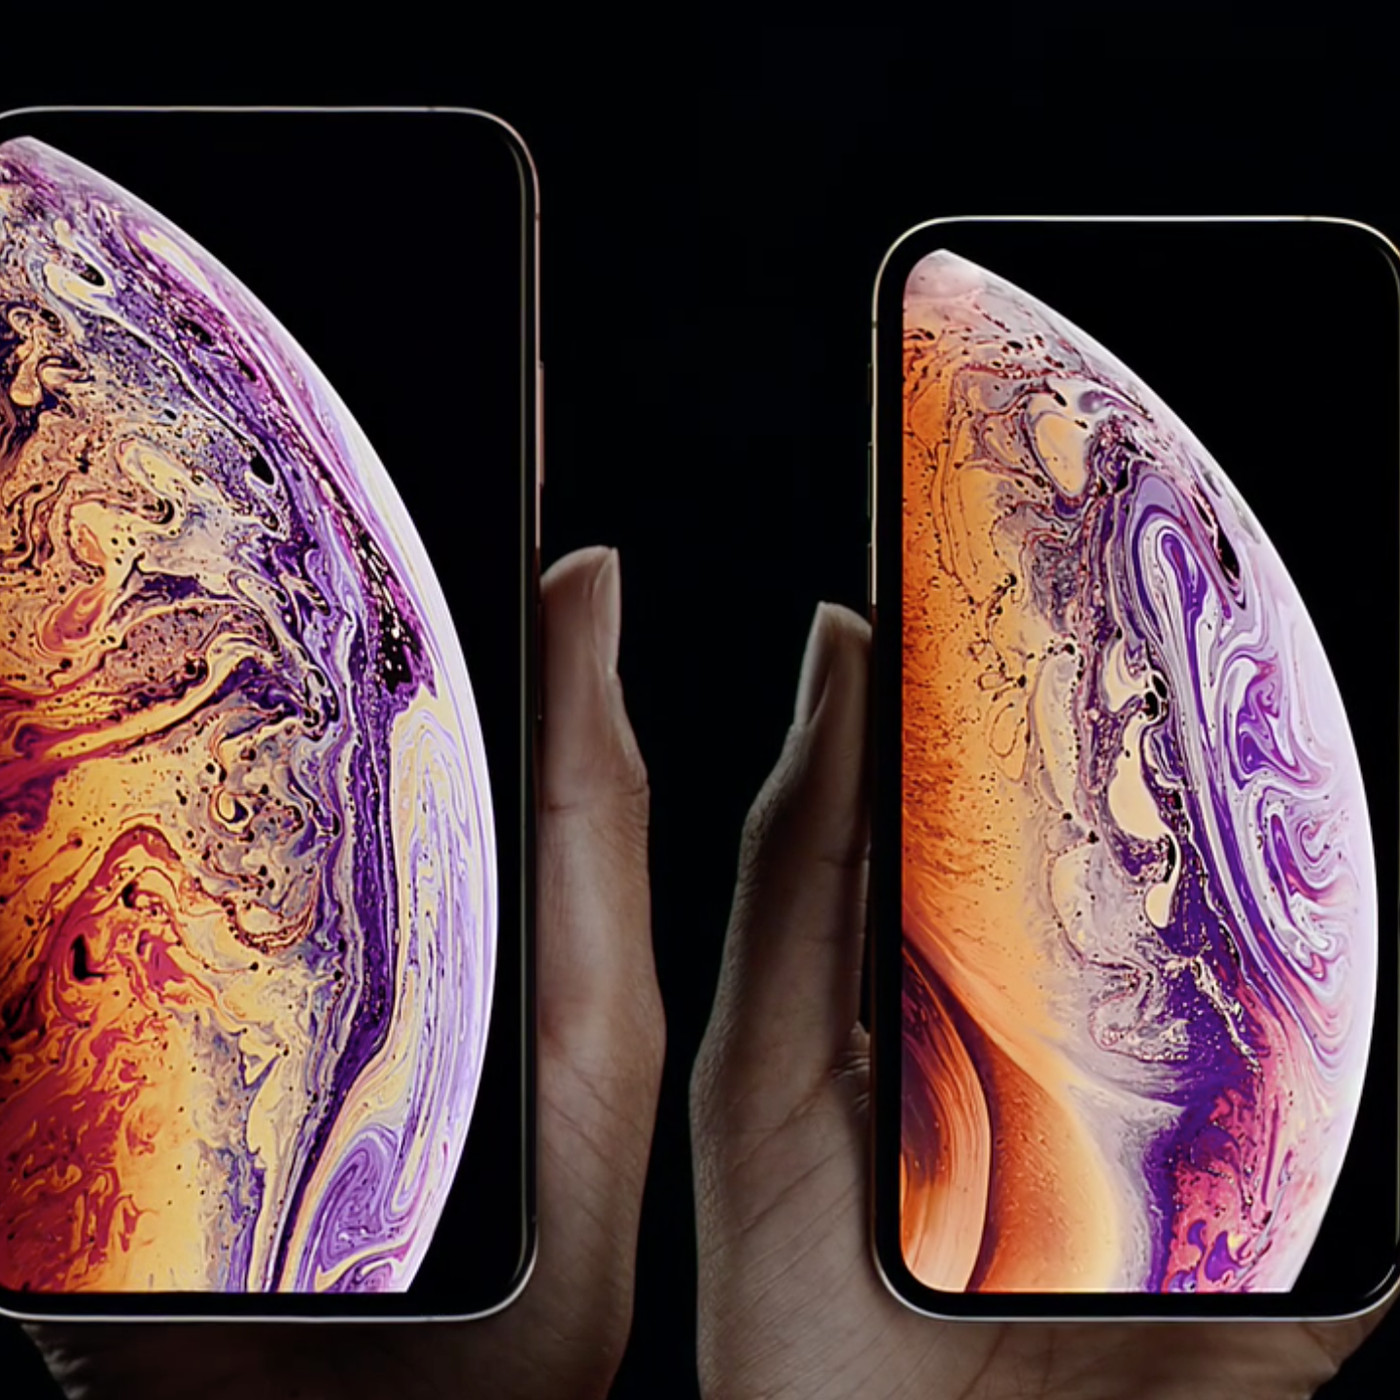 the-bigger-6-5-inch-iphone-could-be-called-iphone-xs-max